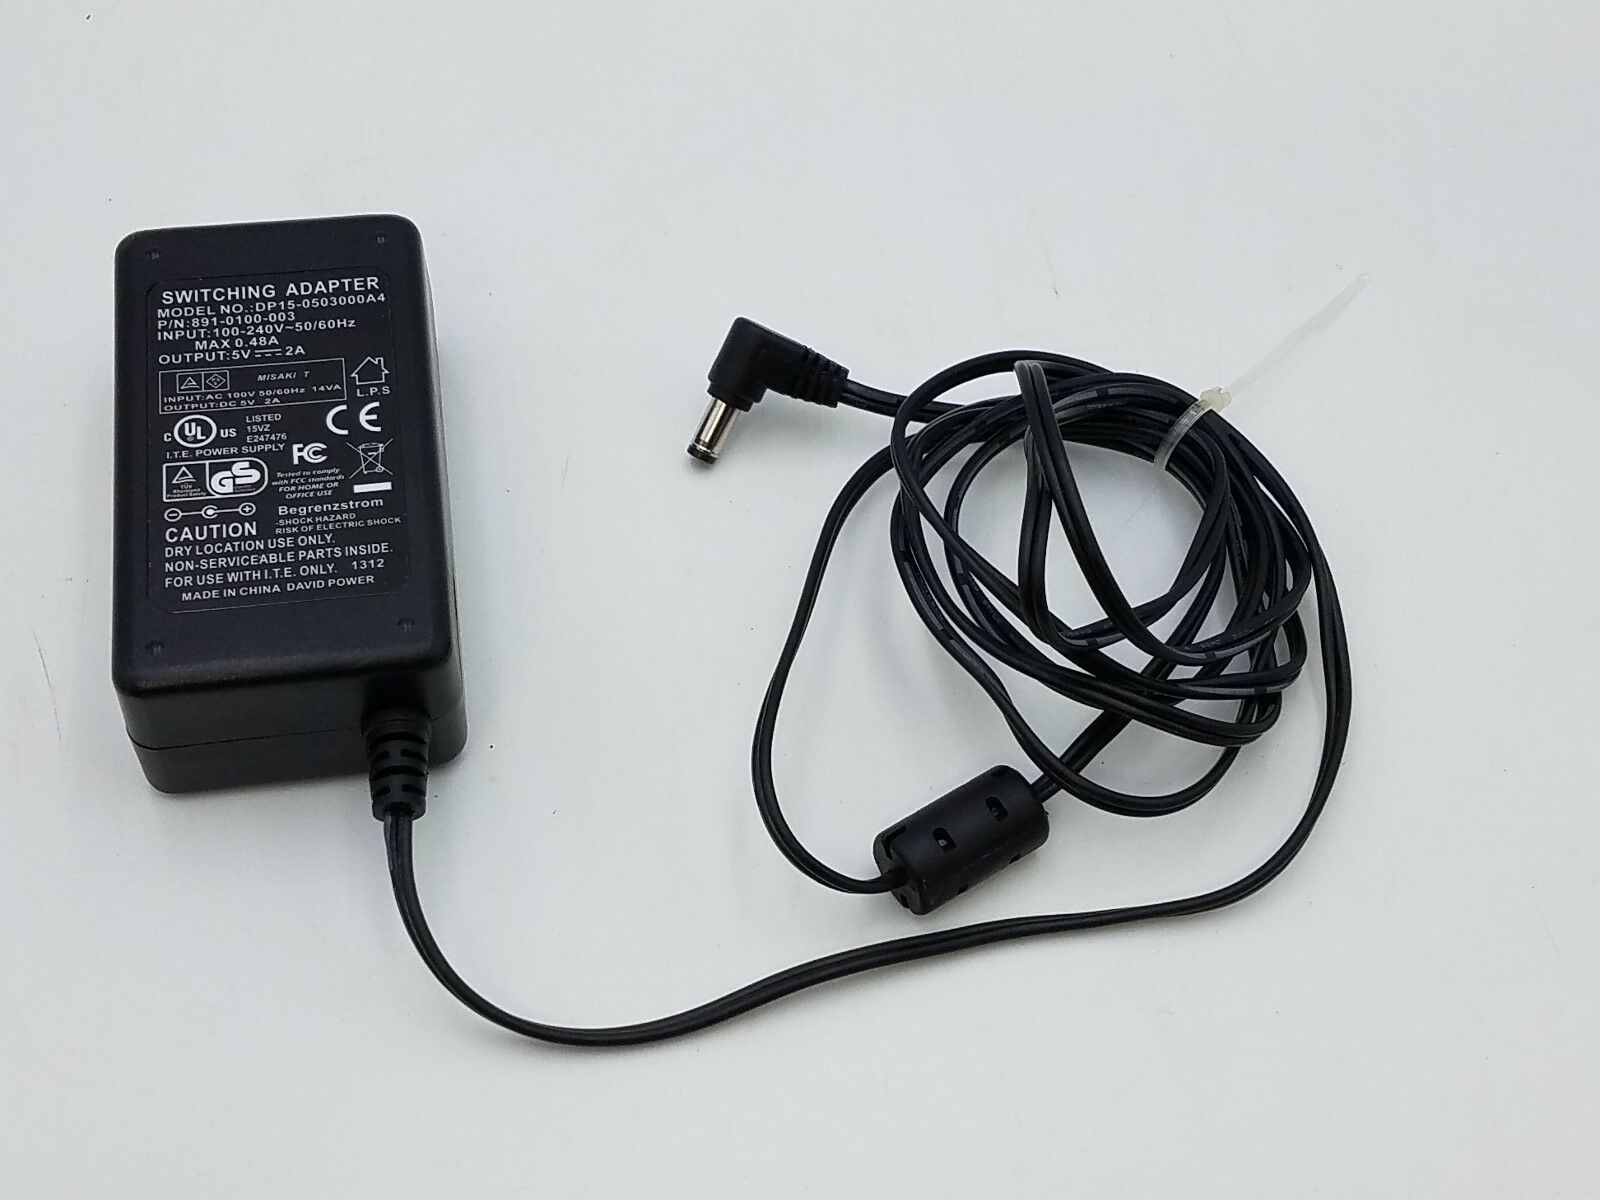 New 5V 2A Begrenzstrom DP15-0503000A4 891-0100-003 Switching AC Adapter